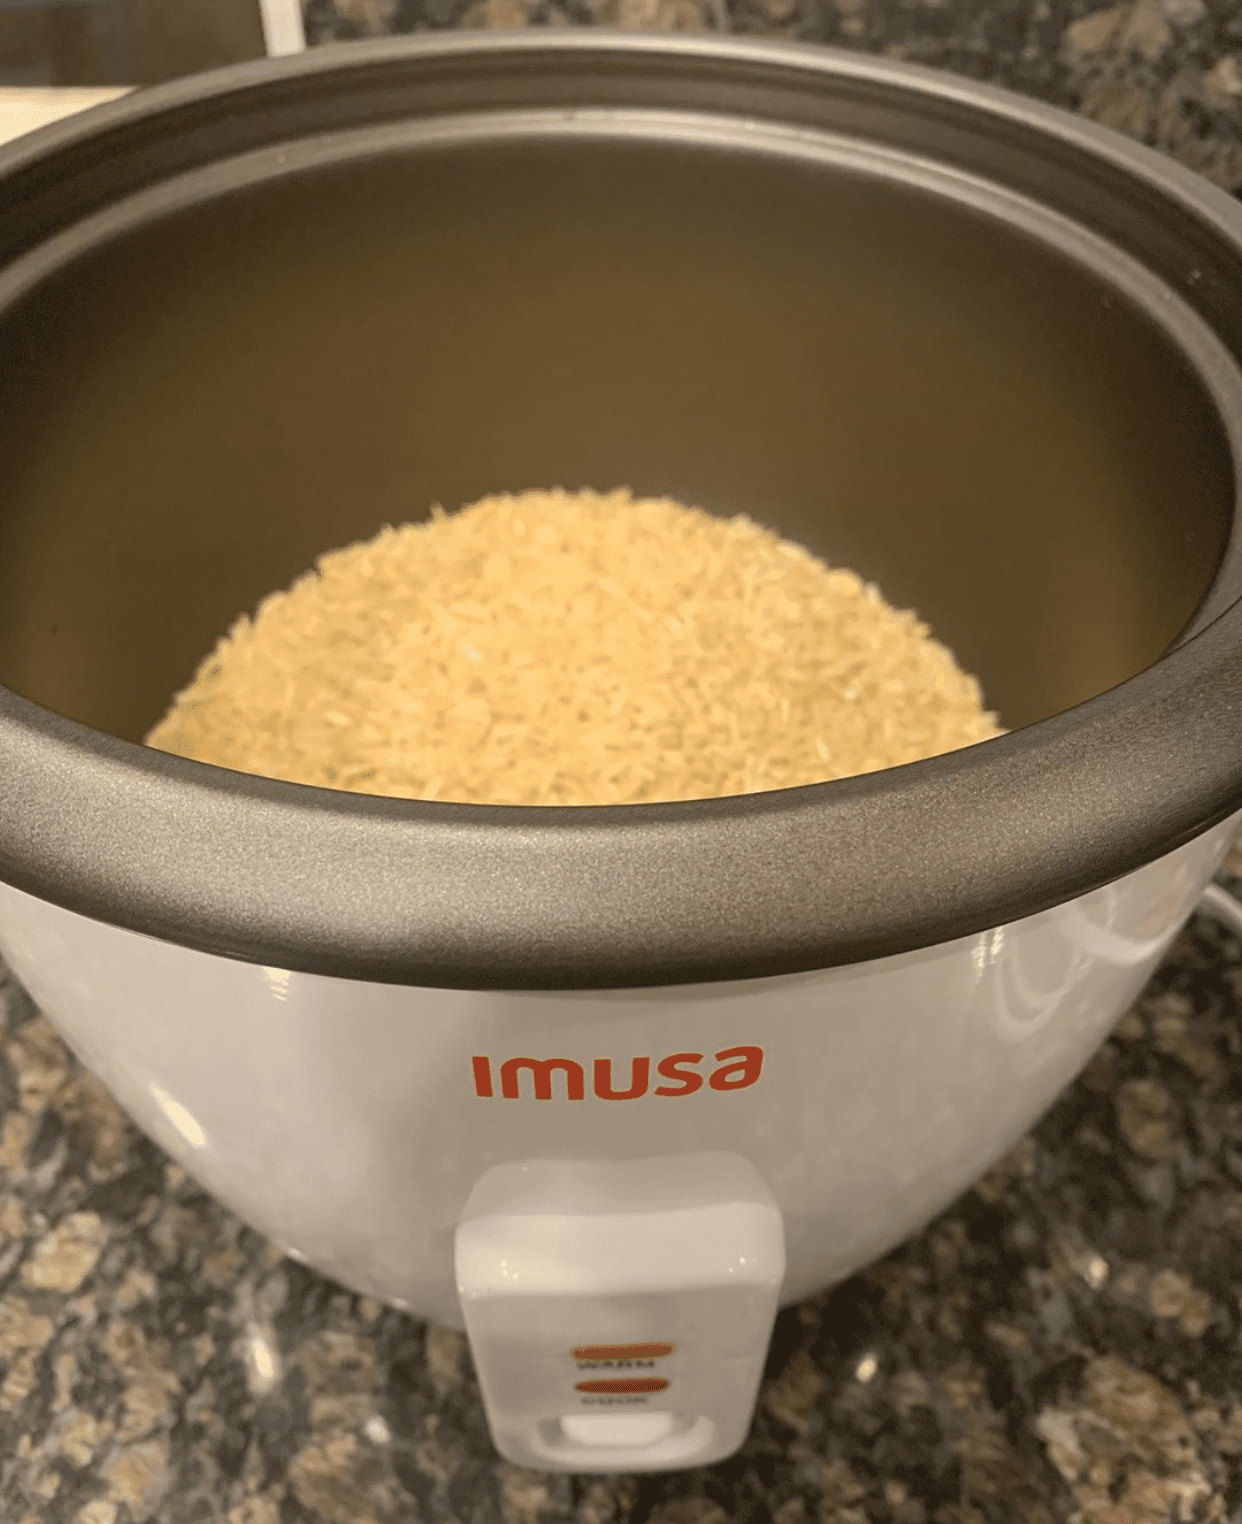 IMUSA 3-Cup Non-Stick White Rice Cooker with Non-Stick Cooking Pot